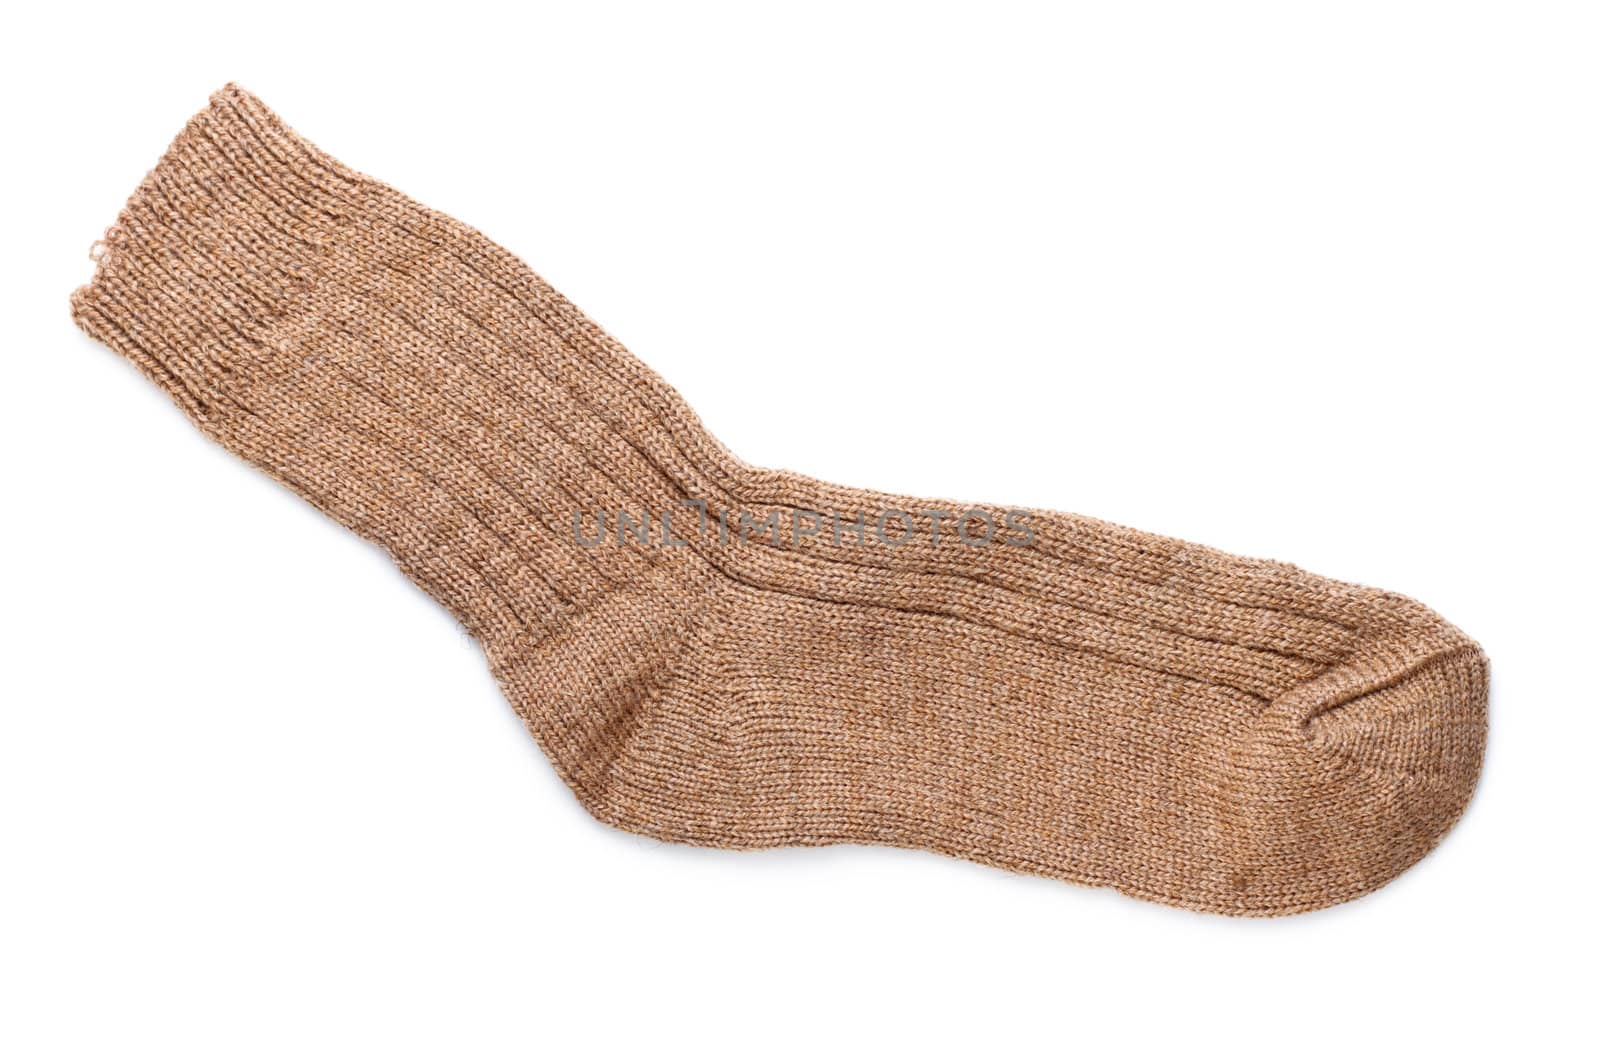 single woollen sock isolated on white background